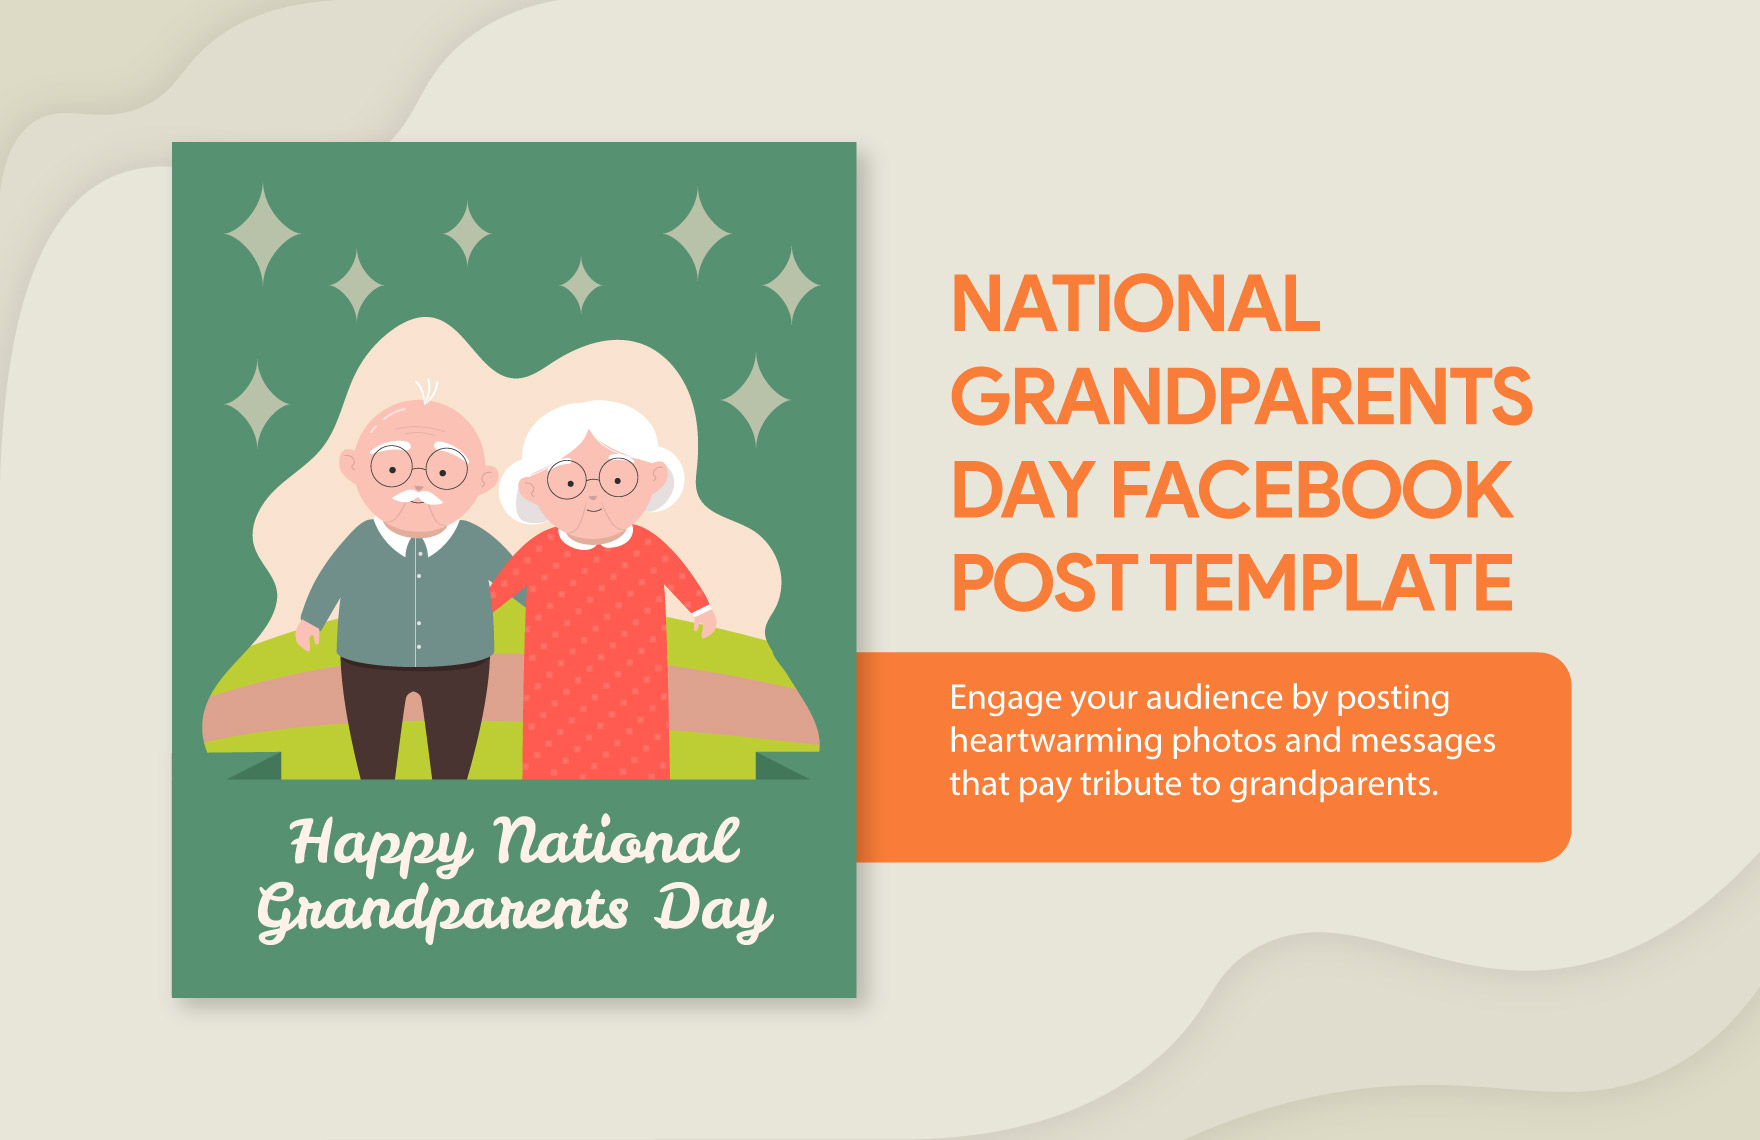 National Grandparents Day Facebook Post Template